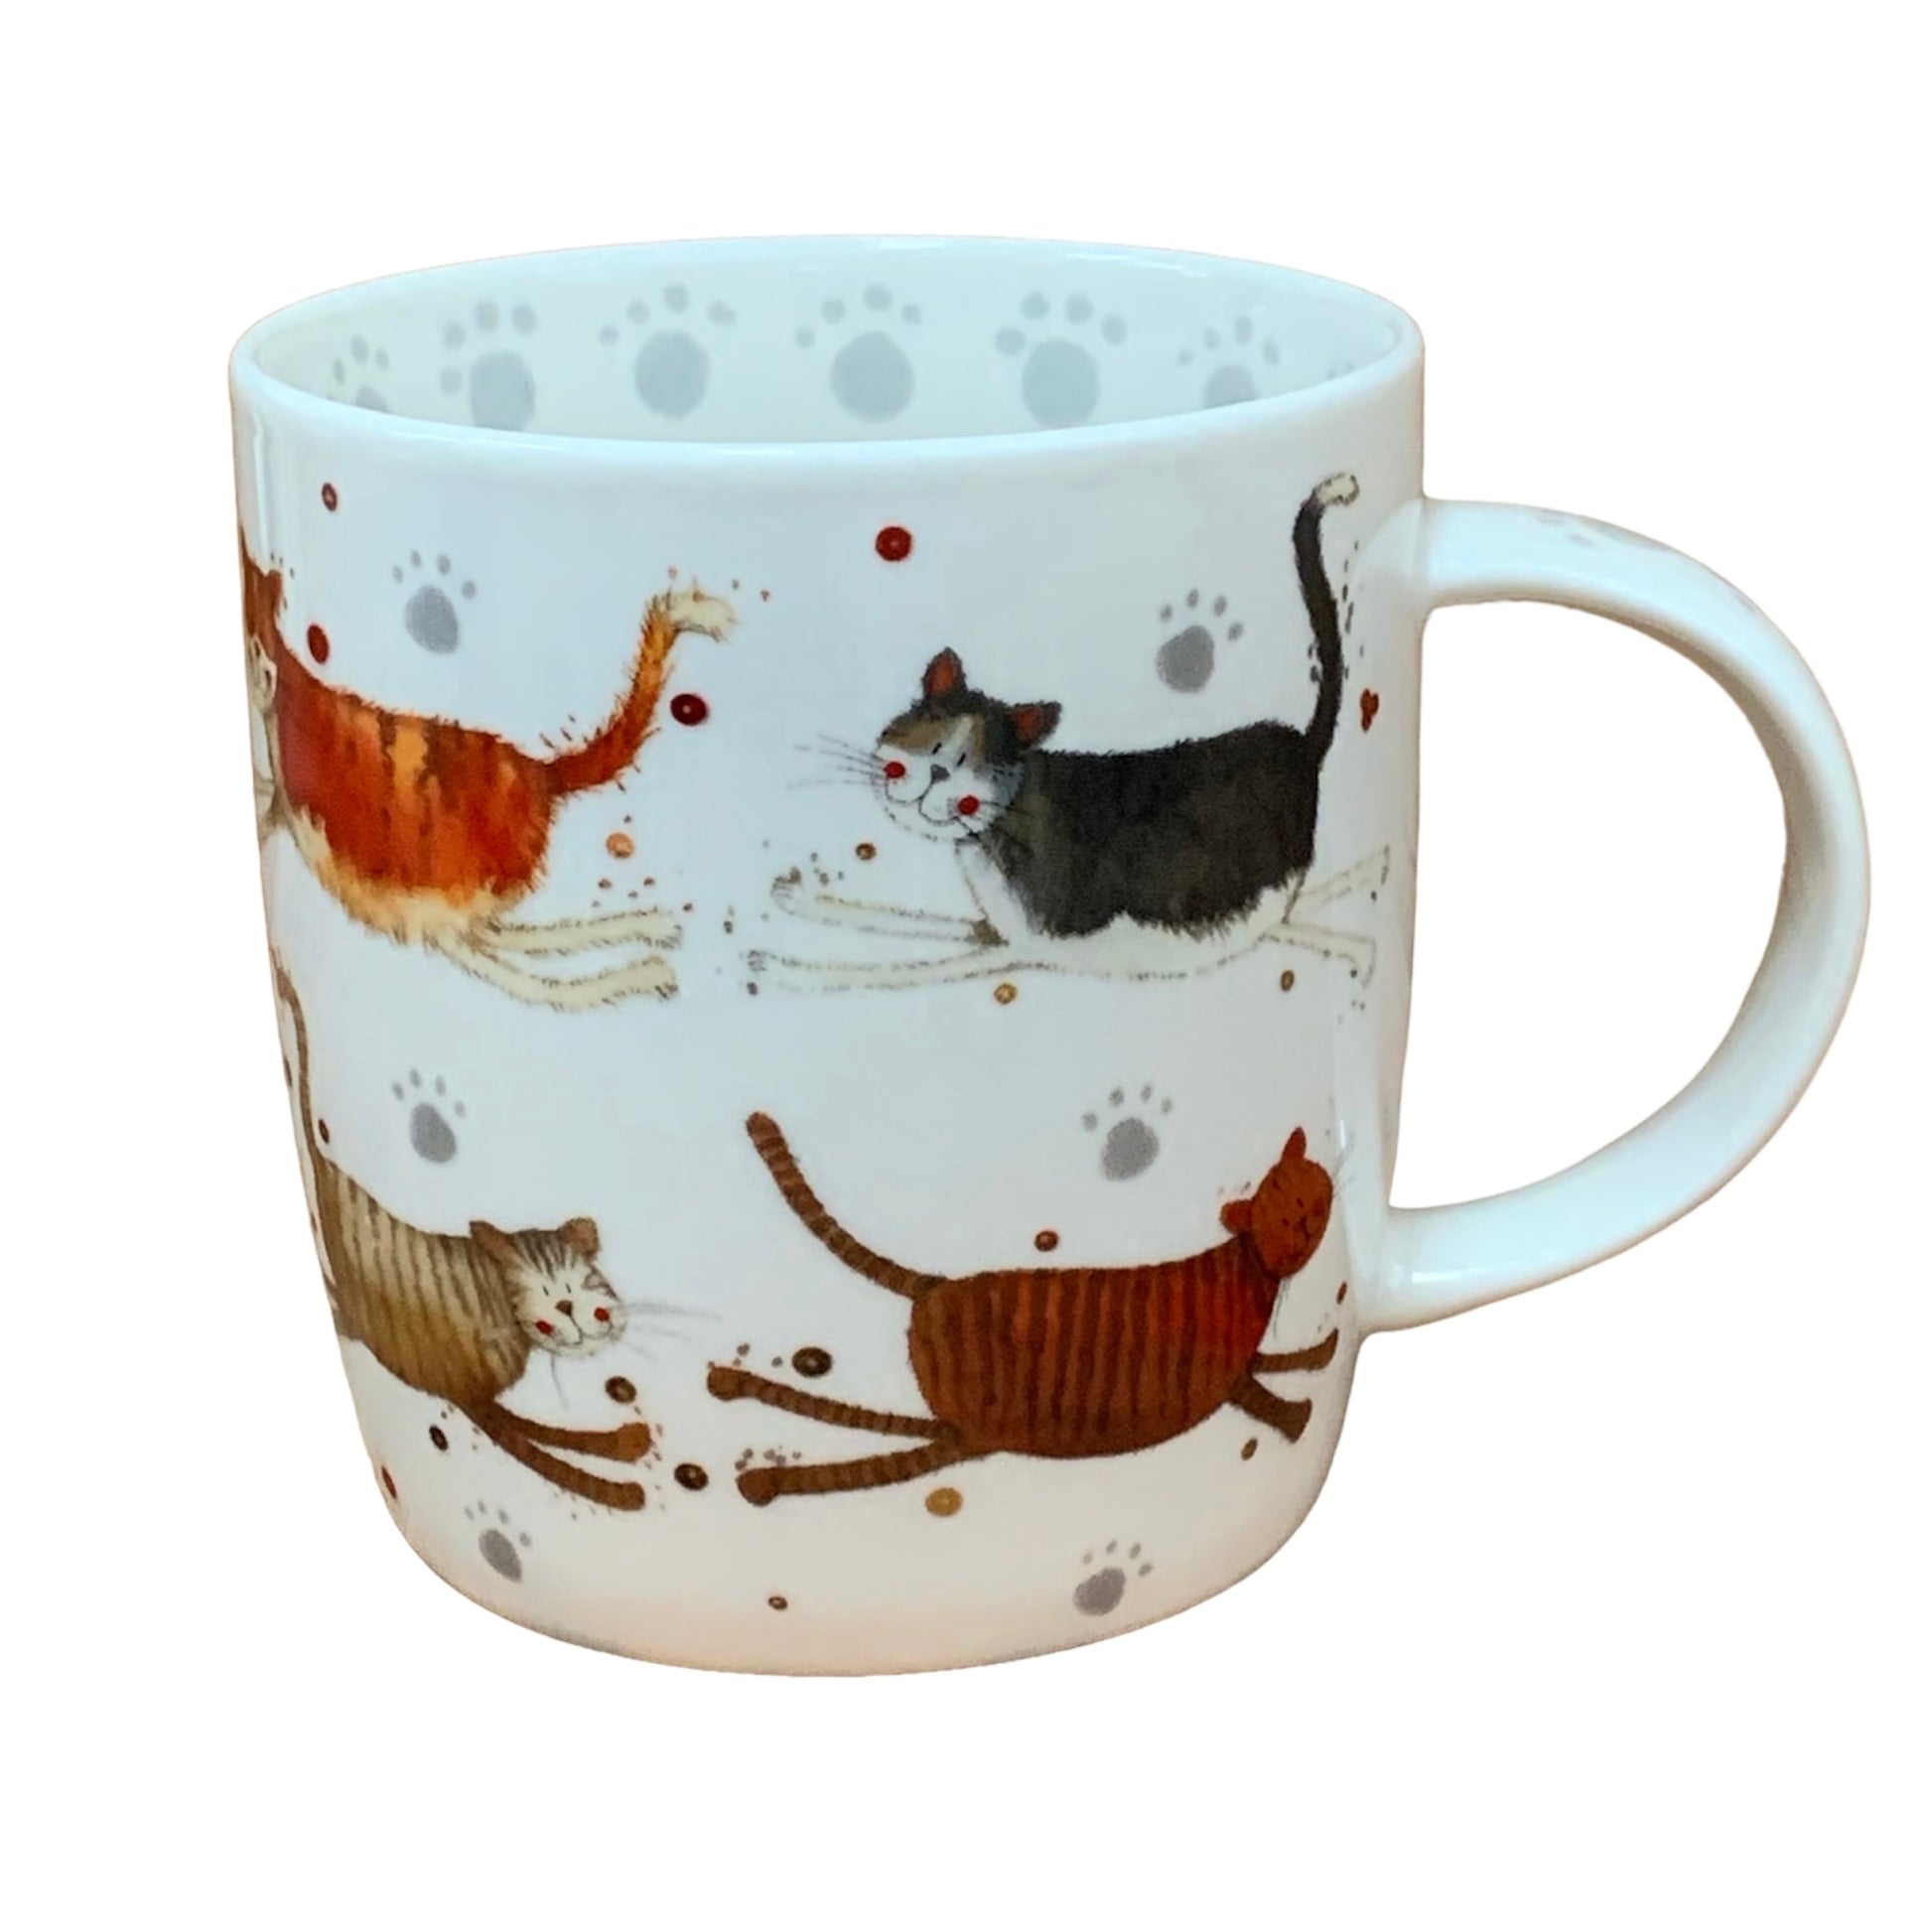 Alex Clark mug is illustrated with an array of happy Cats